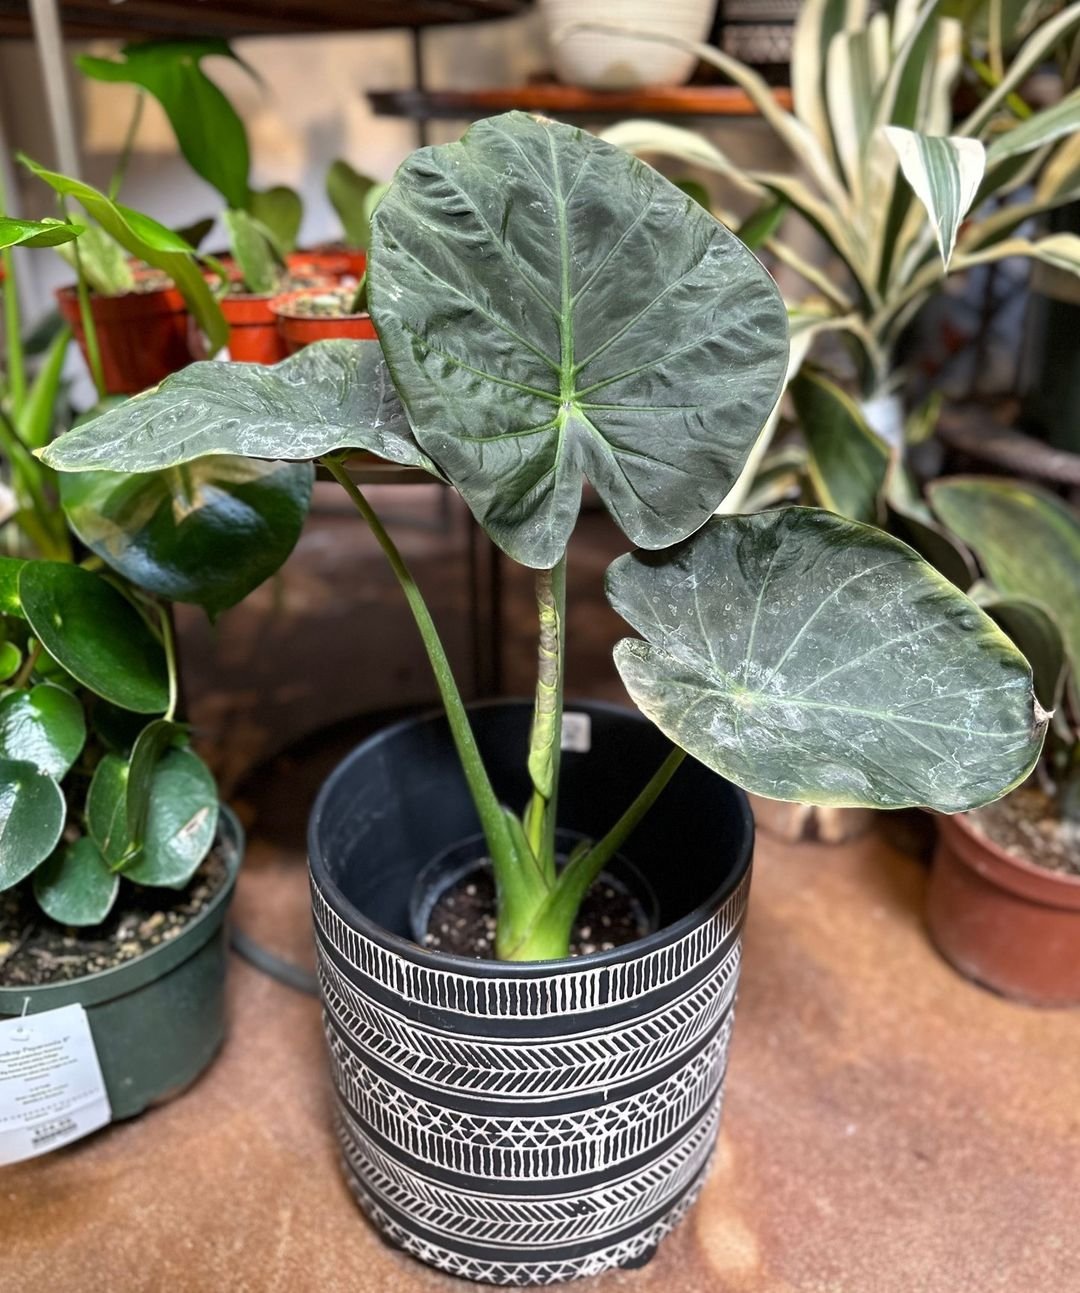 A potted plant with large leaves on a table, featuring the Regal Shield Alocasia.